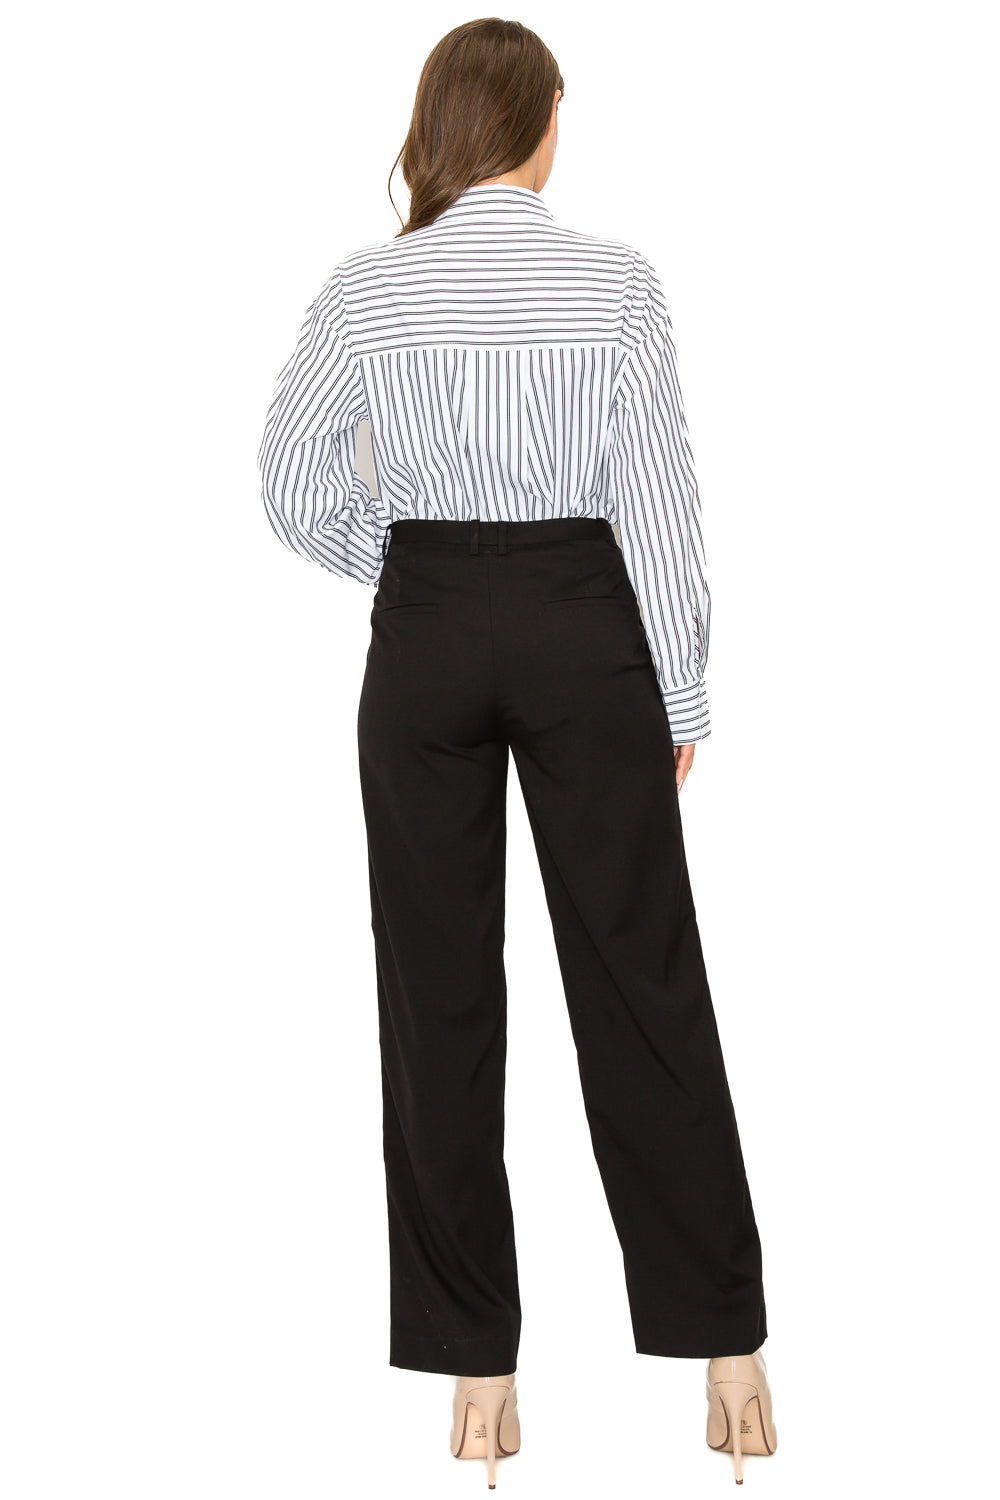 Audry Straight Pants